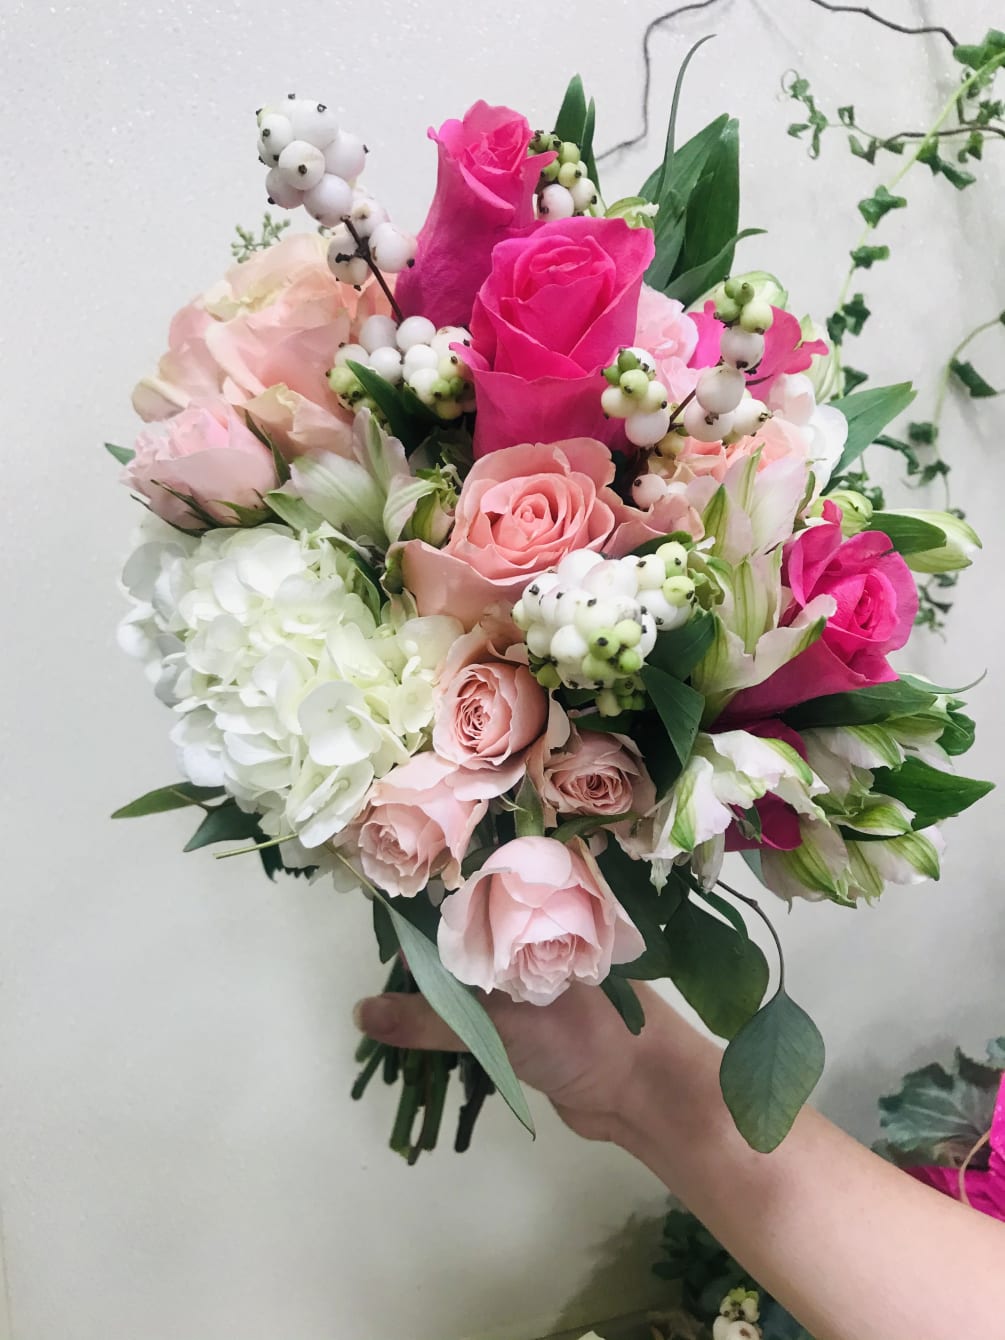 Lovely hand-tied bouquet in hot pinks roses, white hydrangea and fillers.